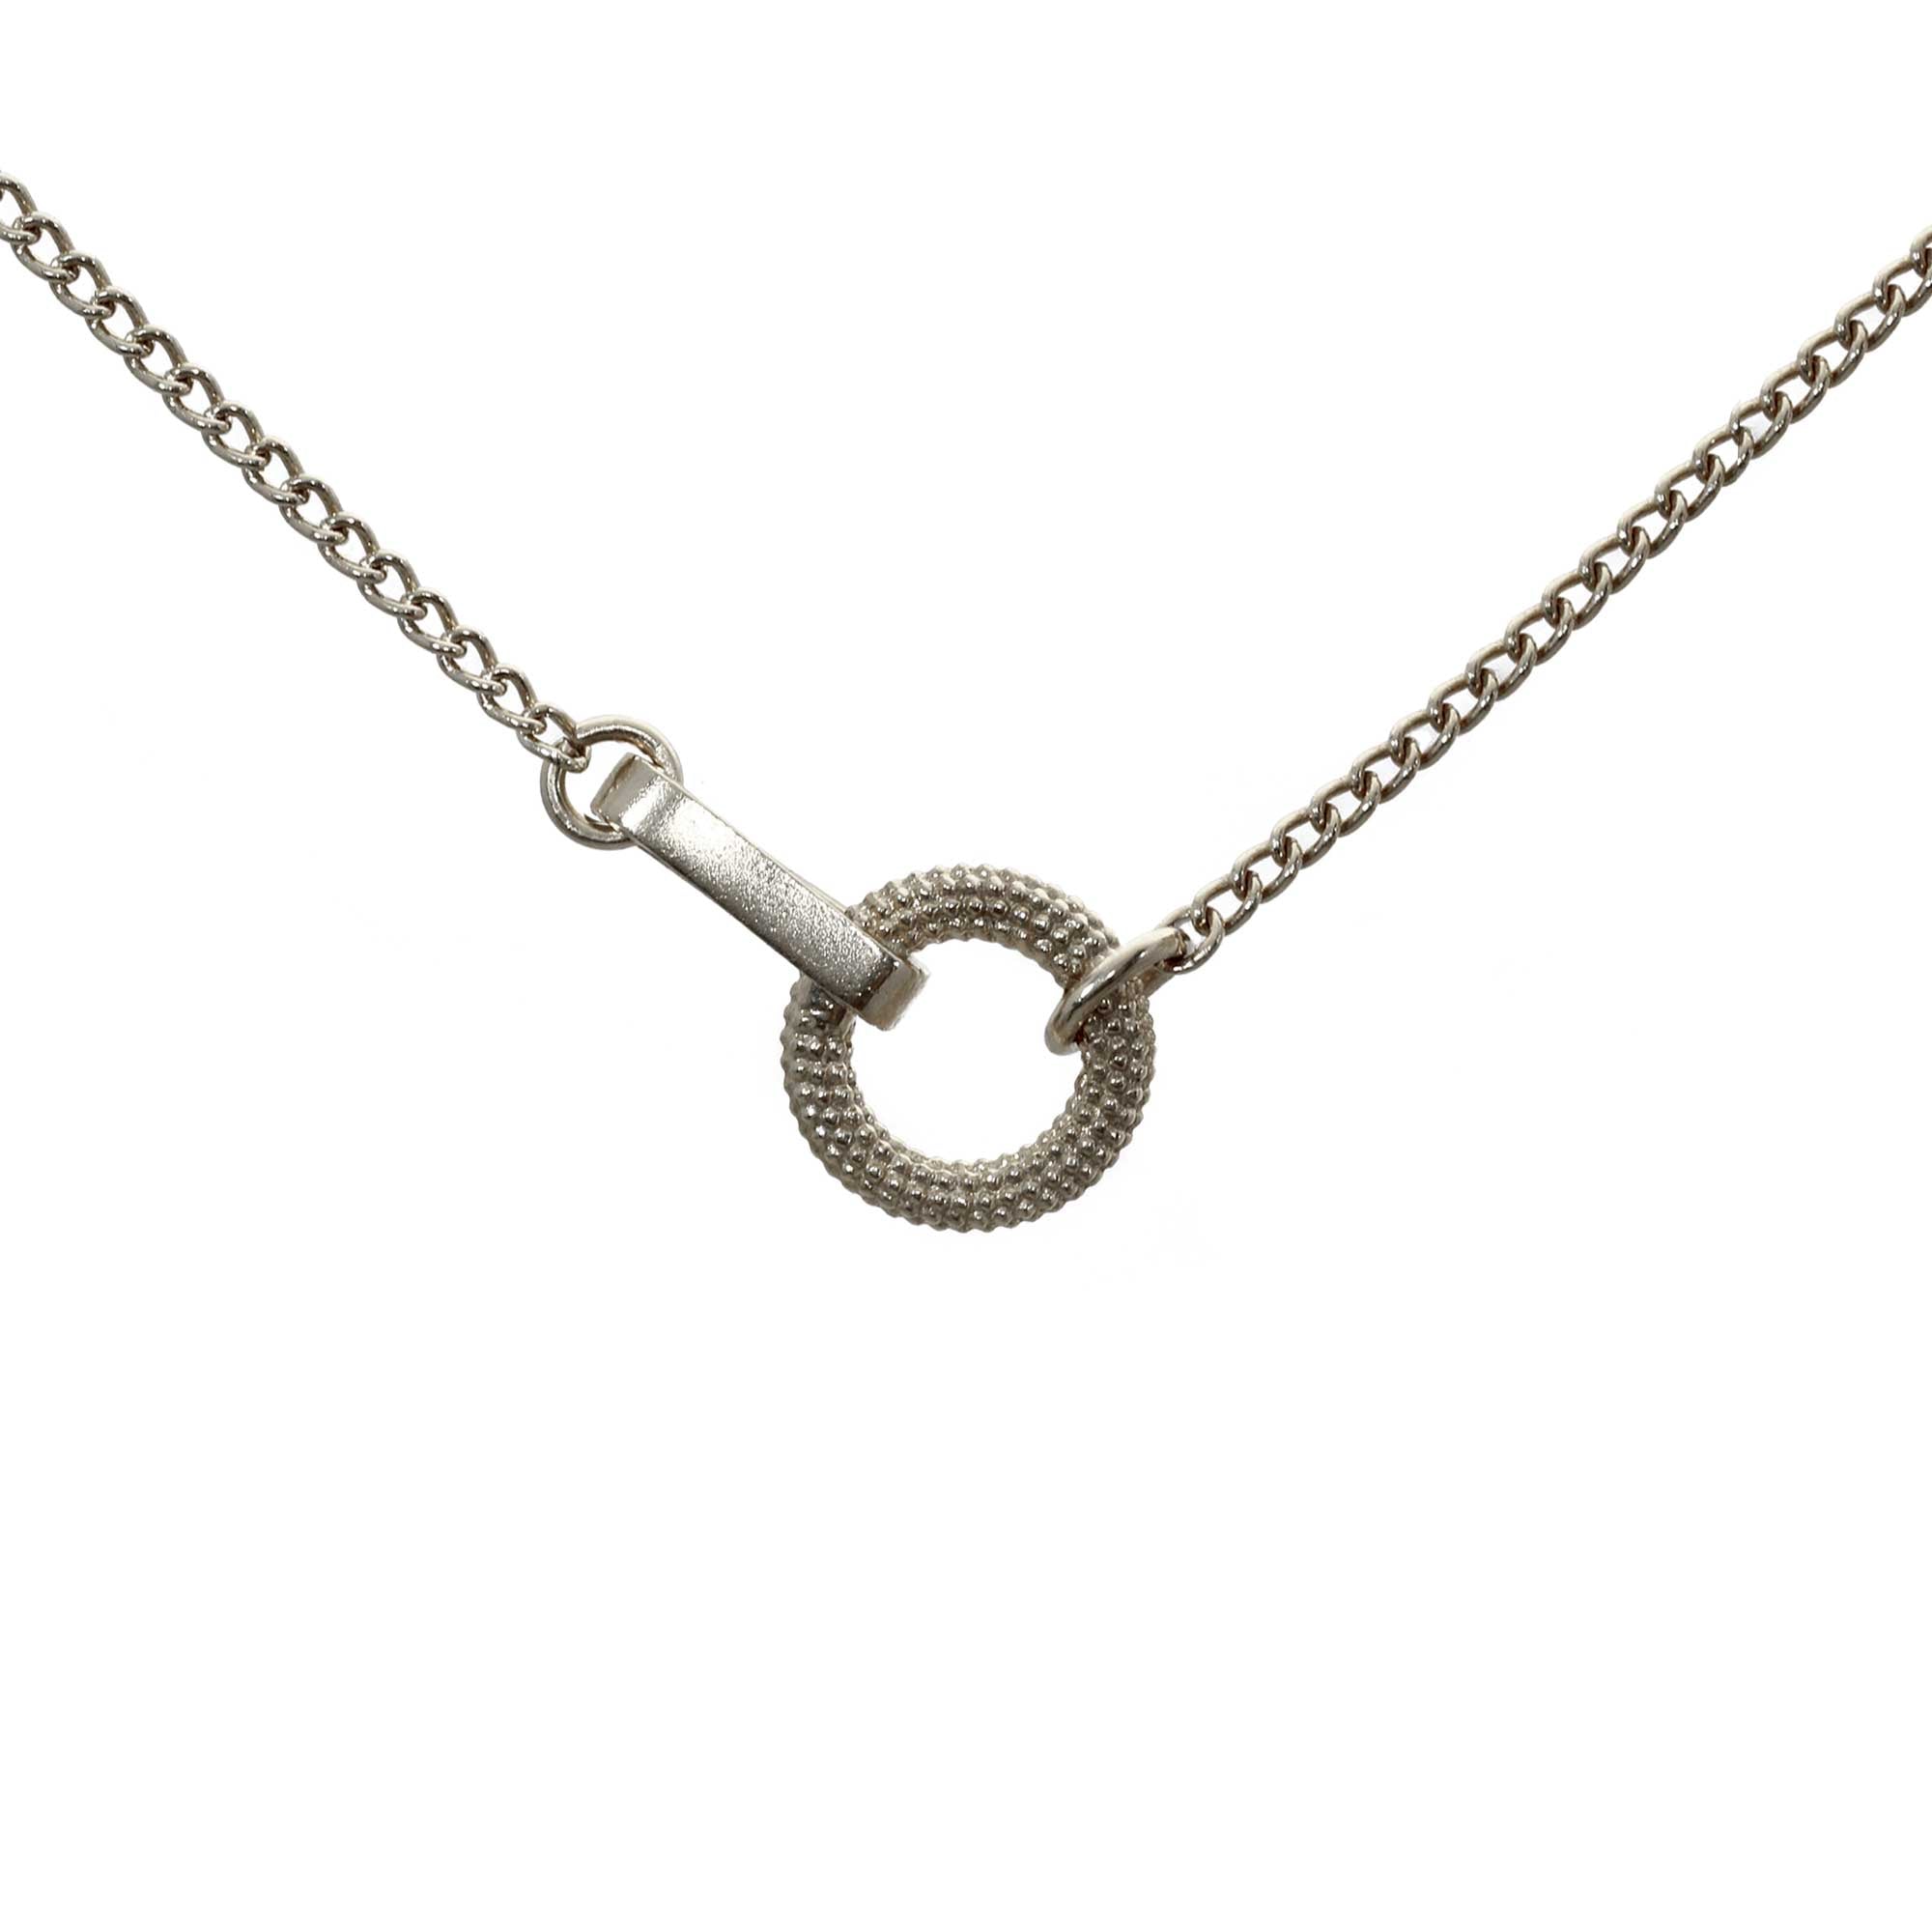 Tyro Short chain necklace in sterling silver